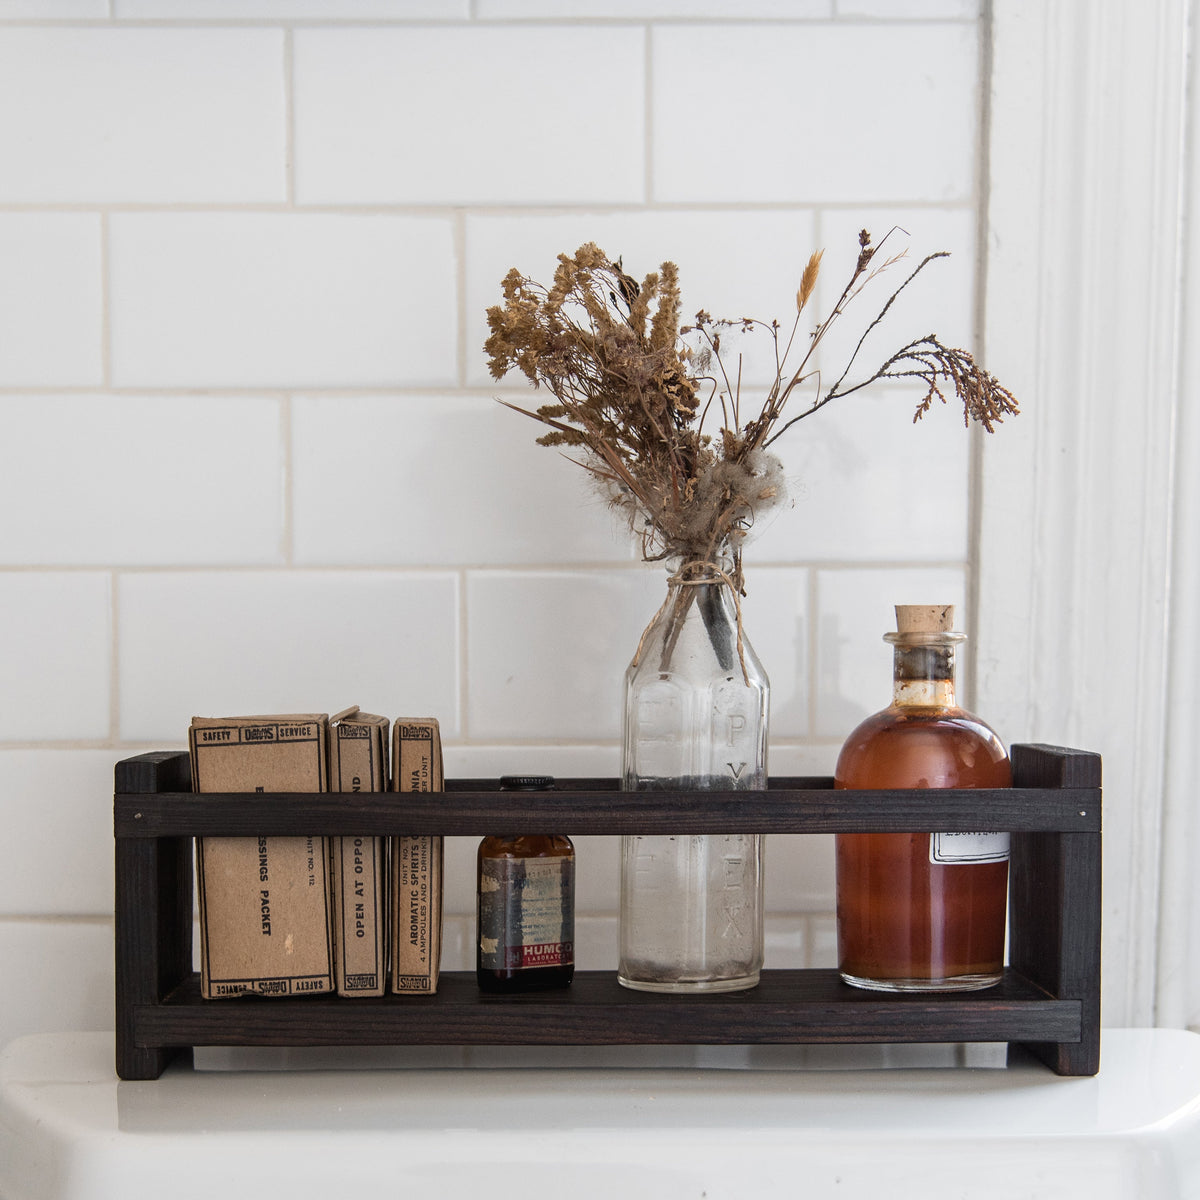 Apothecary Caddy – Peg and Awl